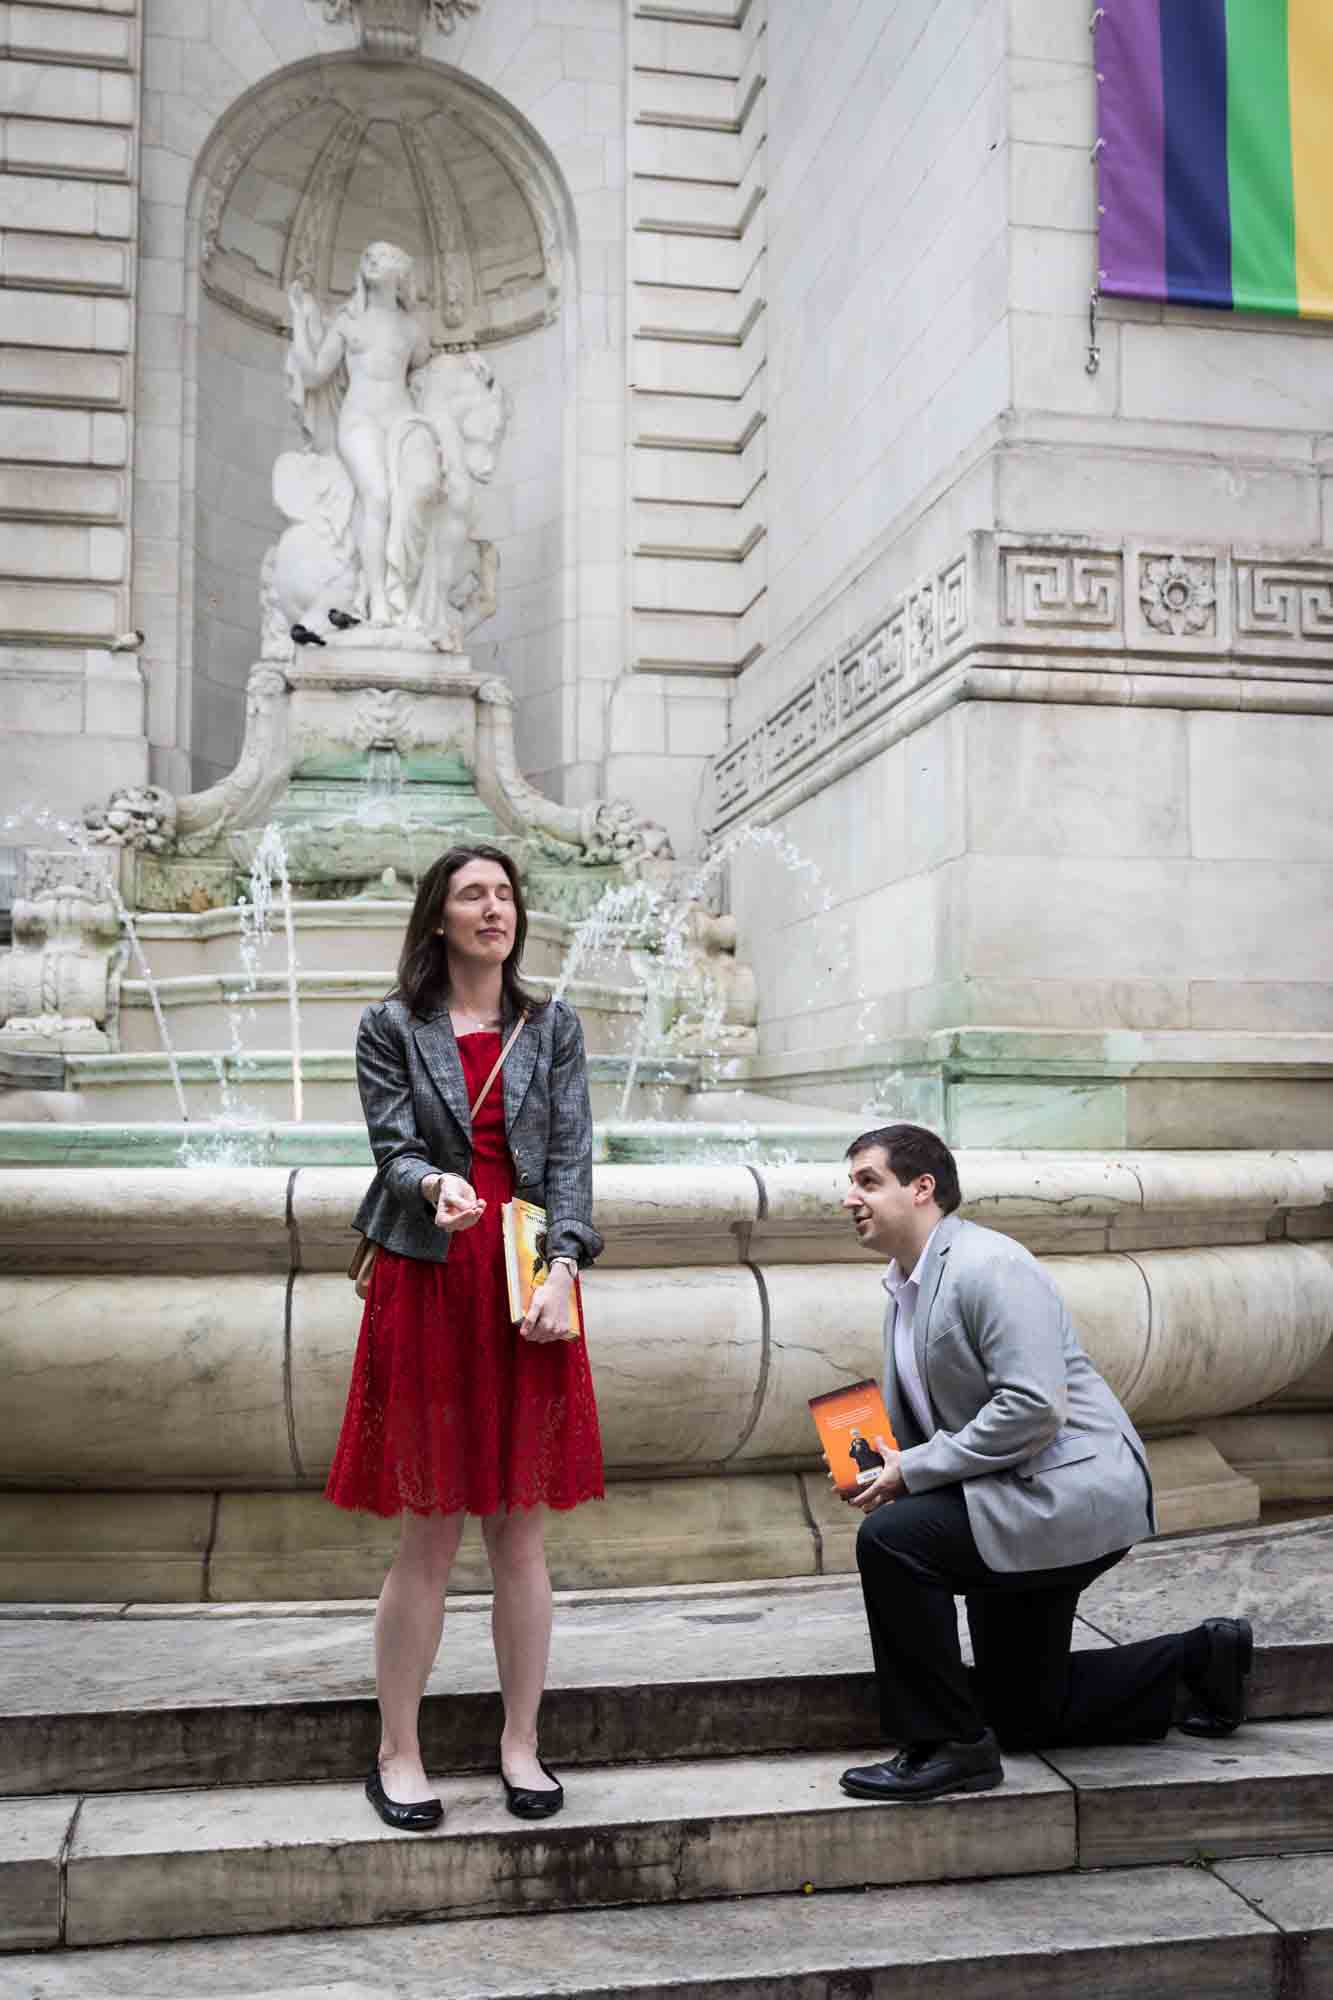 Woman wearing red dress and man on one knee in front of 'Beauty' fountain during a New York Public Library surprise proposal